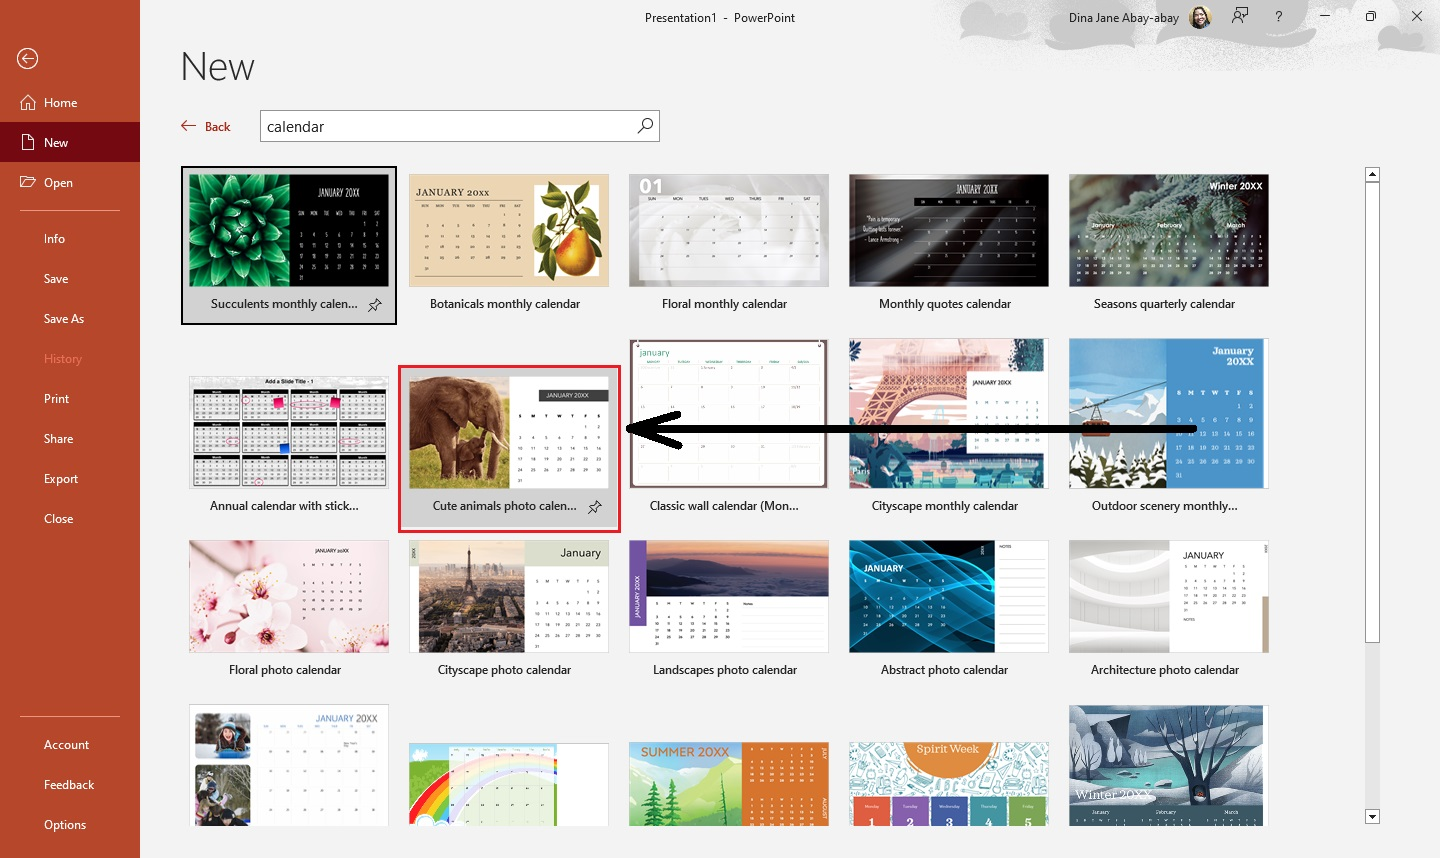 Select a calendar templates and theme for your scheduler.